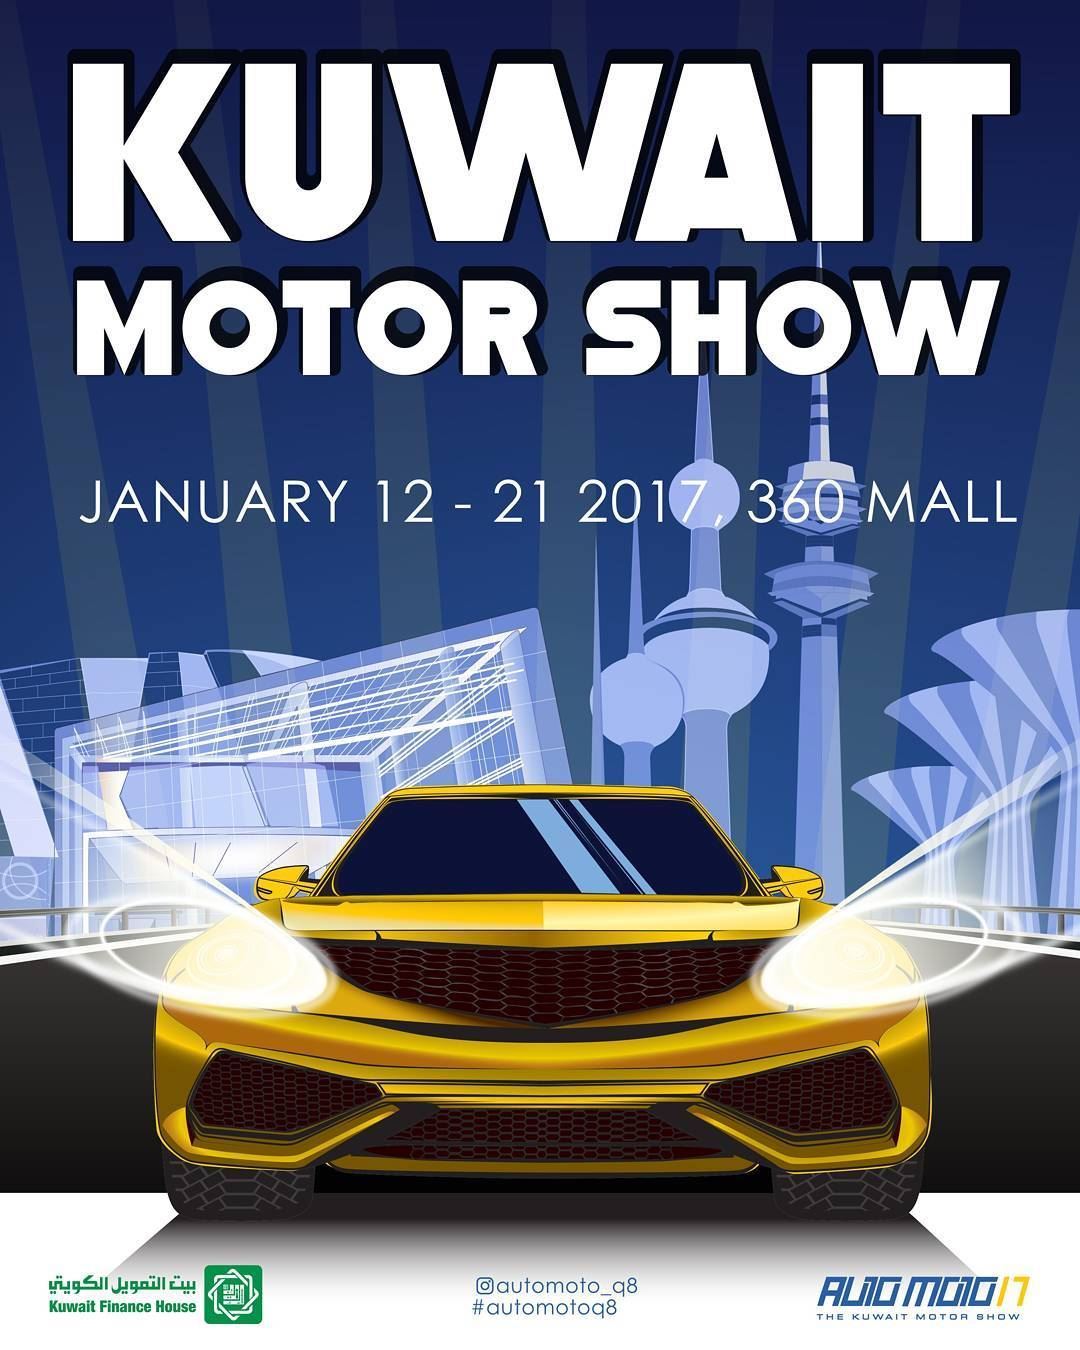 The Annual Kuwait Motor Show "AutoMoto" 2017 in 360 Mall